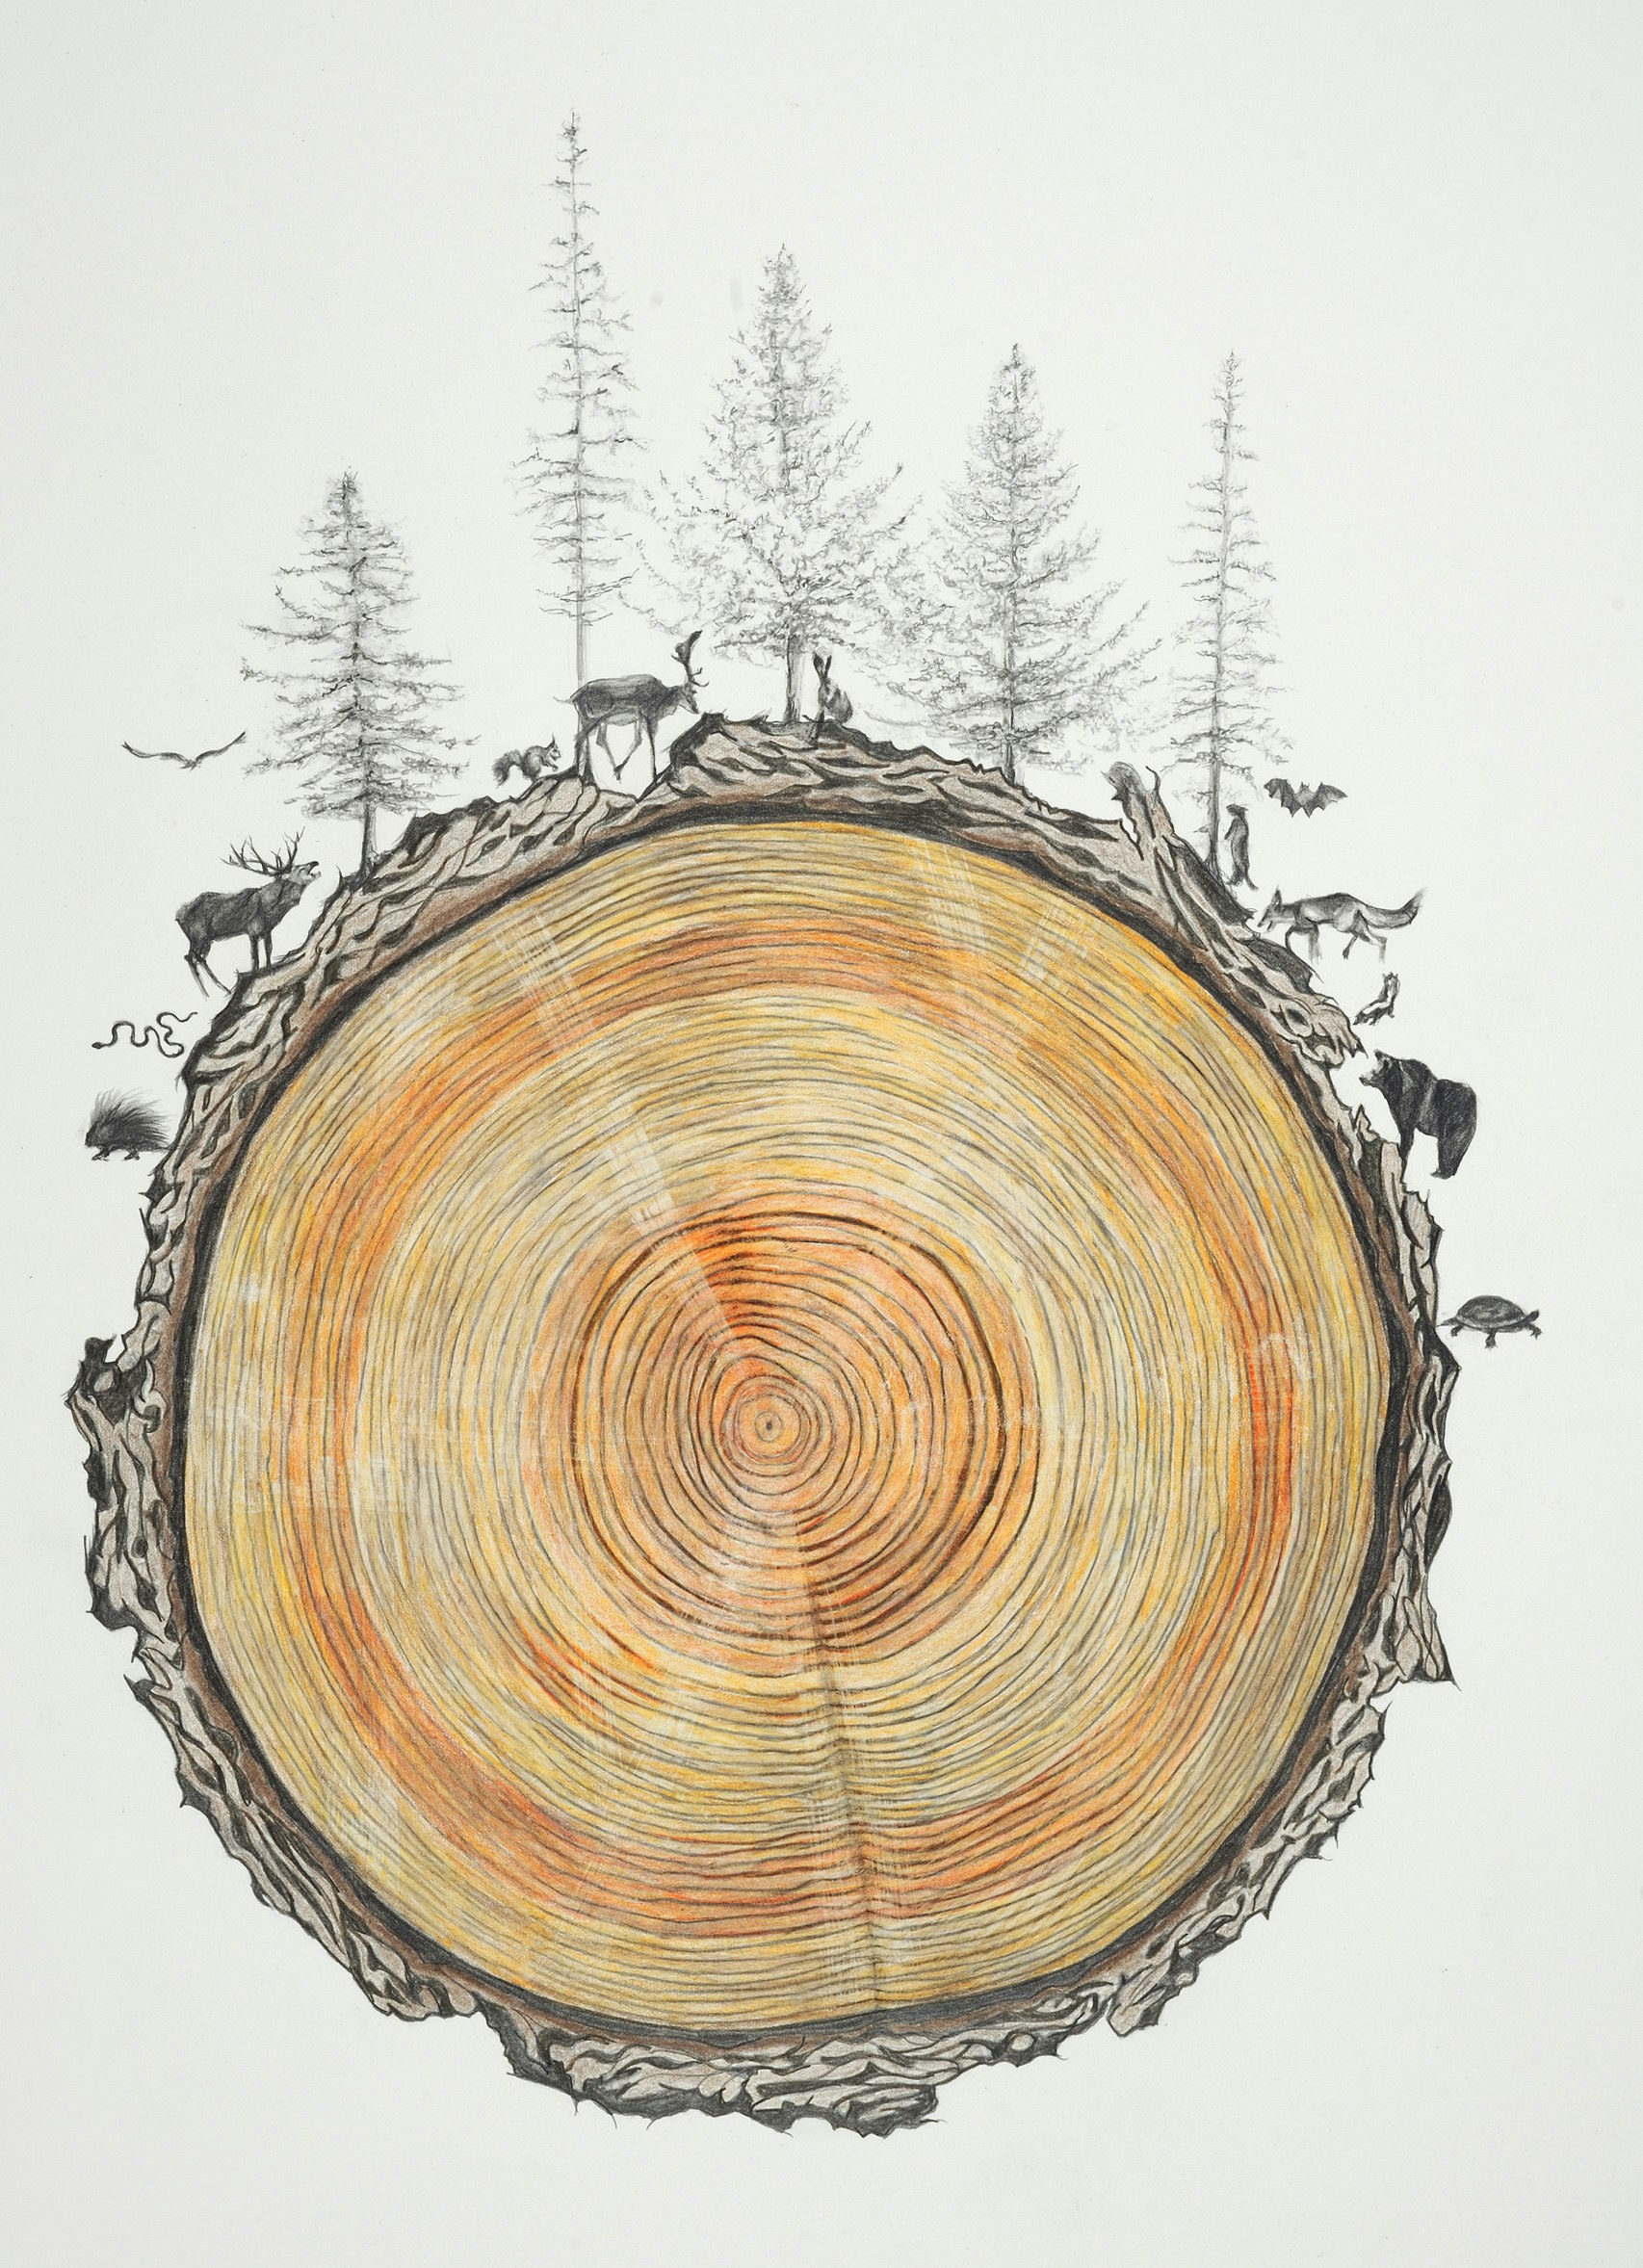 Rebecca Clark: "Family Tree," 2014, graphite and colored pencil on paper, 30 x 22 in. (from Book of Hours)